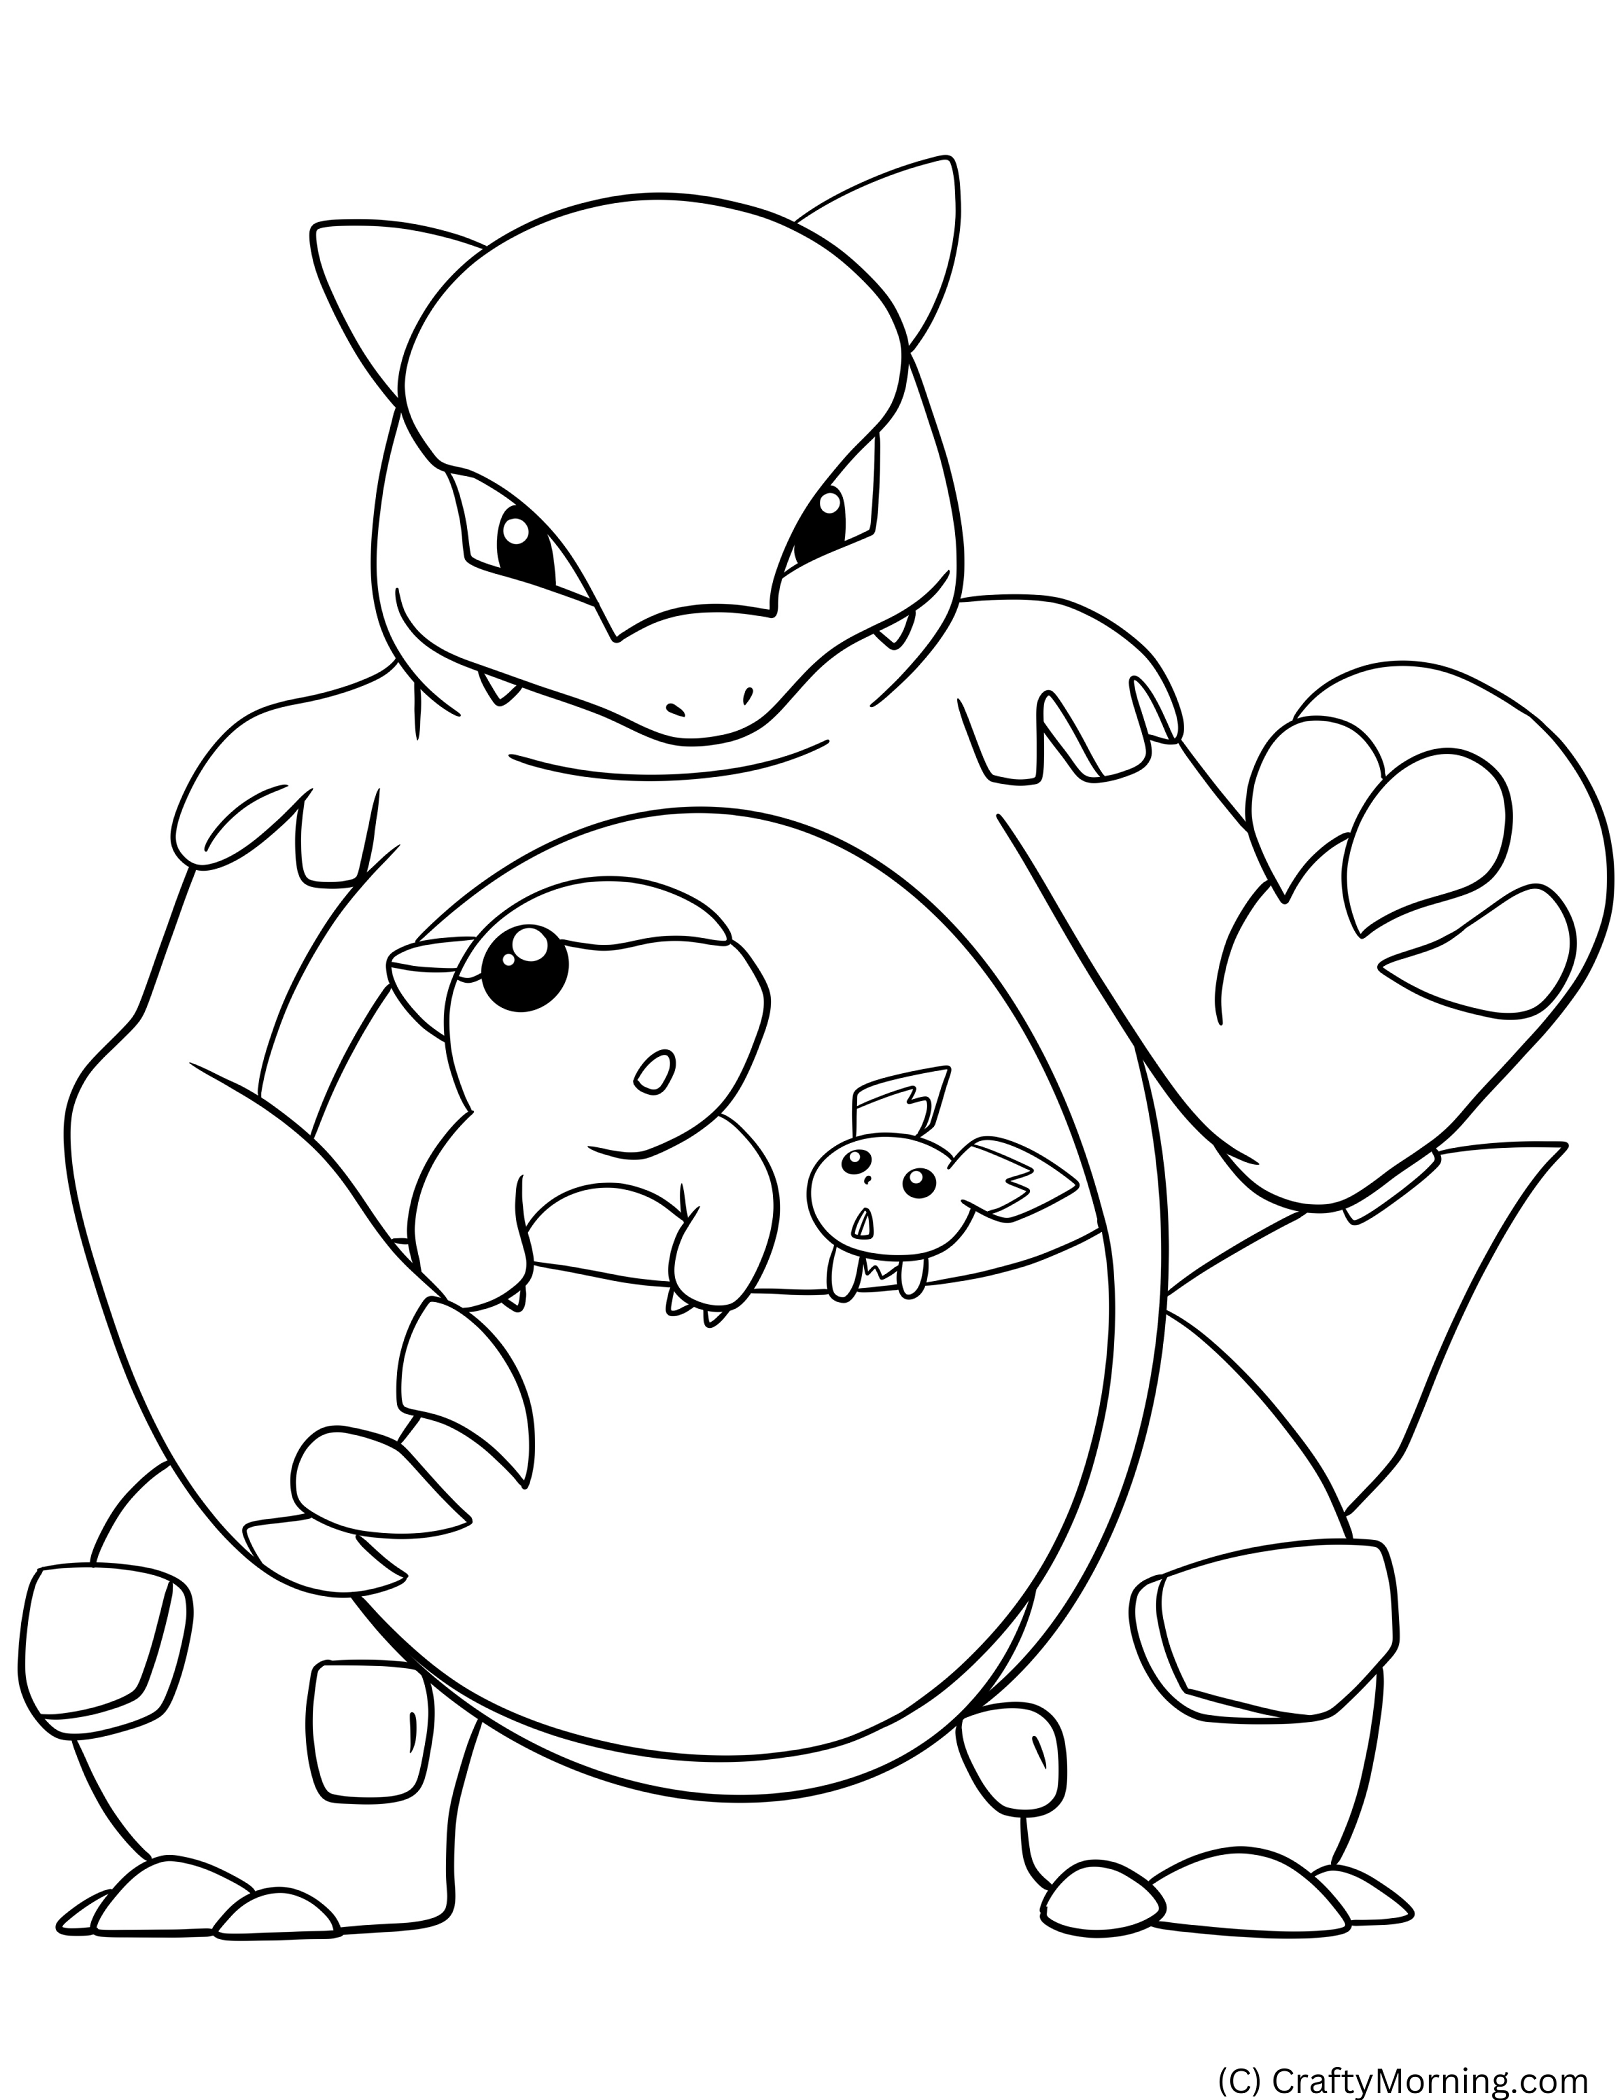 Free Pokemon Coloring Pages - Crafty ...